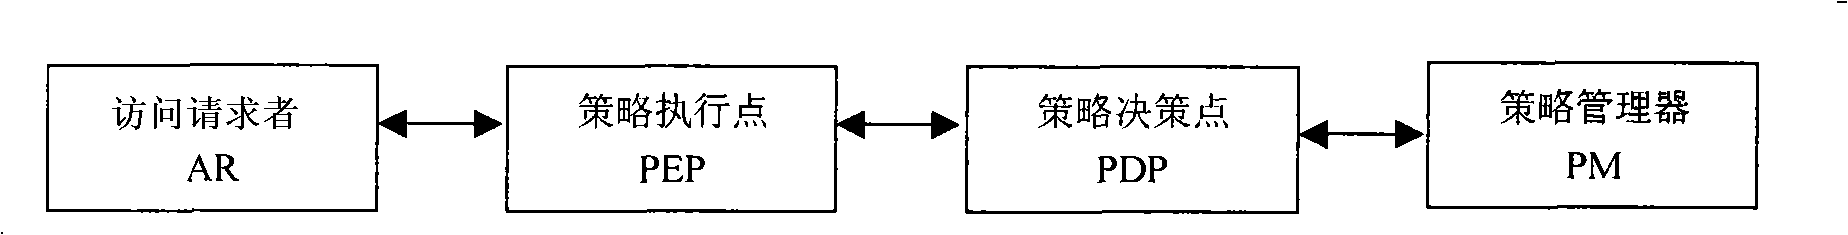 Reliable network management method based on TCPA/TCG reliable network connection